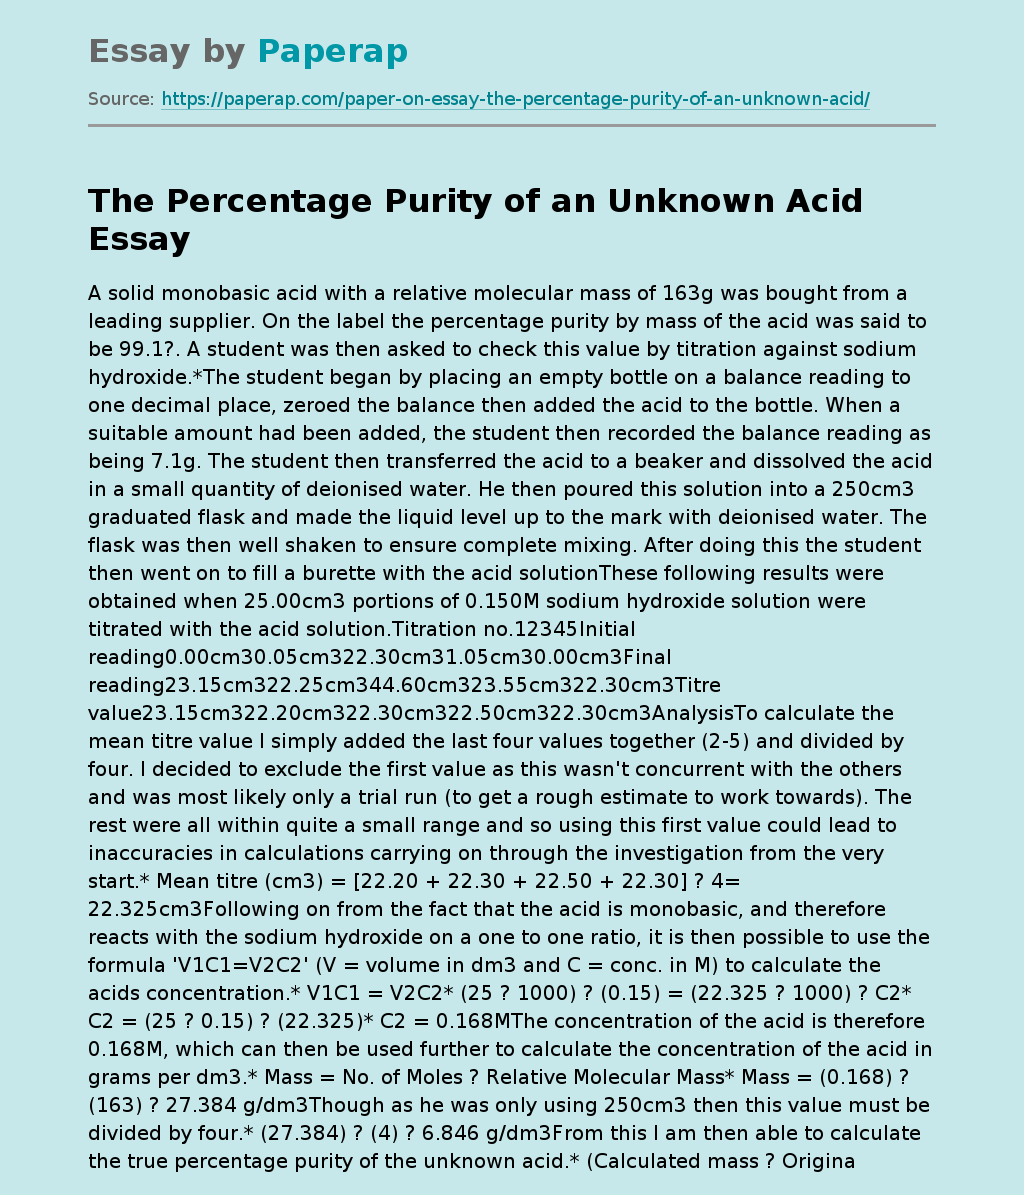 The Percentage Purity of an Unknown Acid